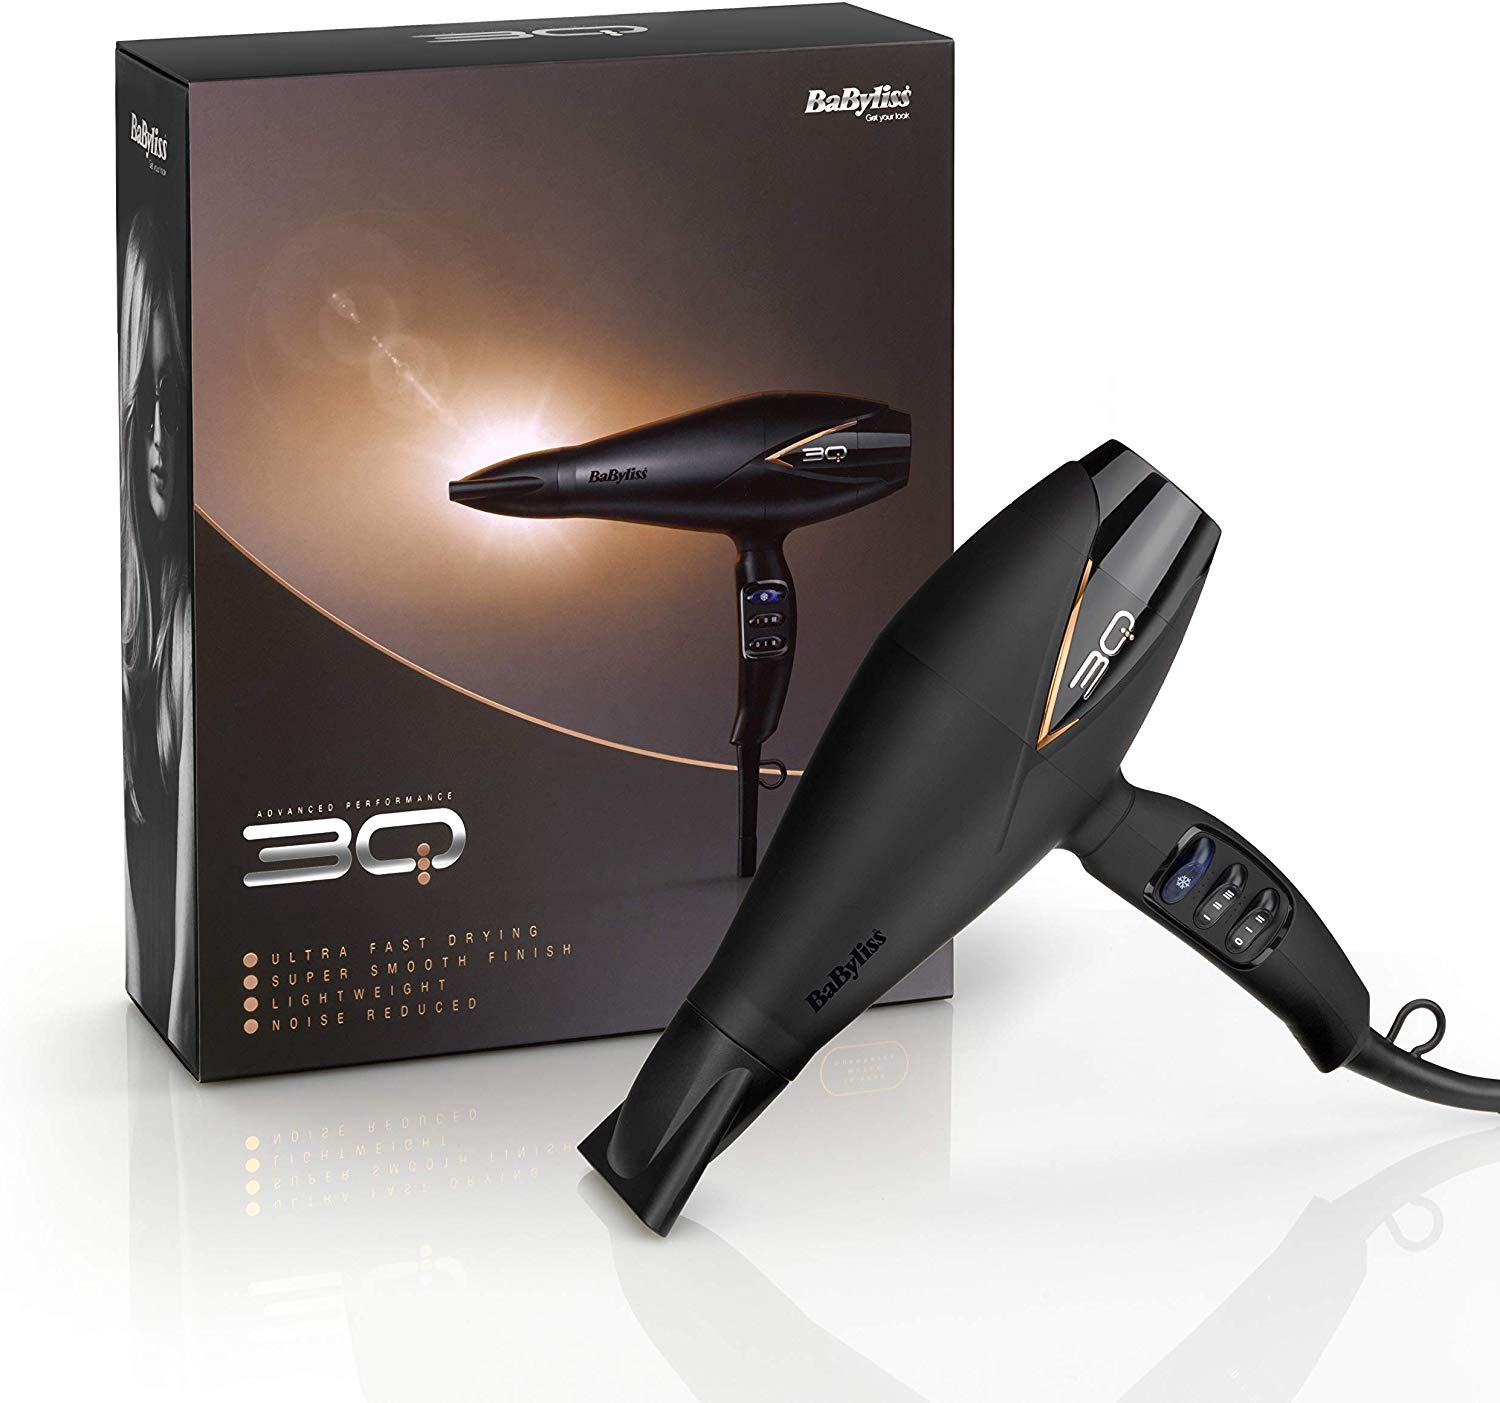 Babyliss 3Q Hairdryer Review - Is It Any Good? - ehaircare